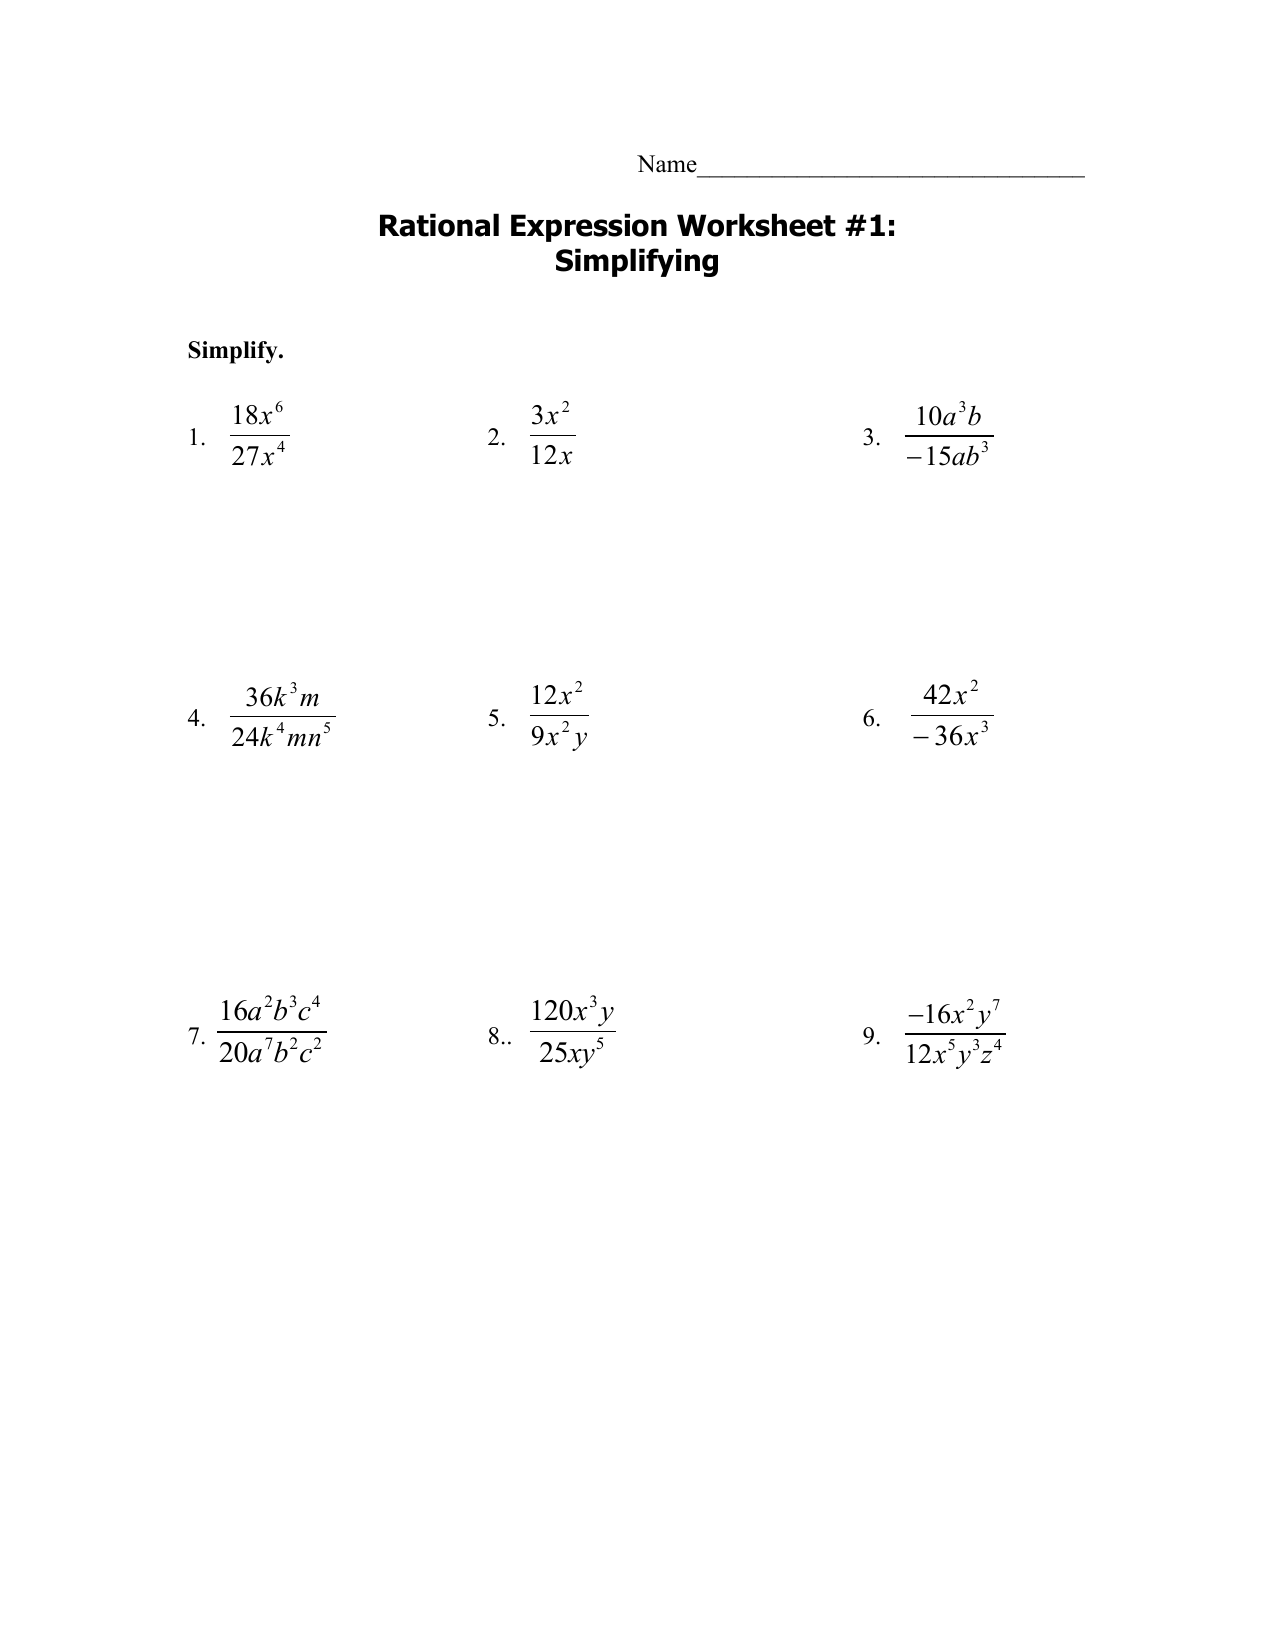 M24 rationalworksheets24-245 24 For Simplifying Expressions Worksheet With Answers